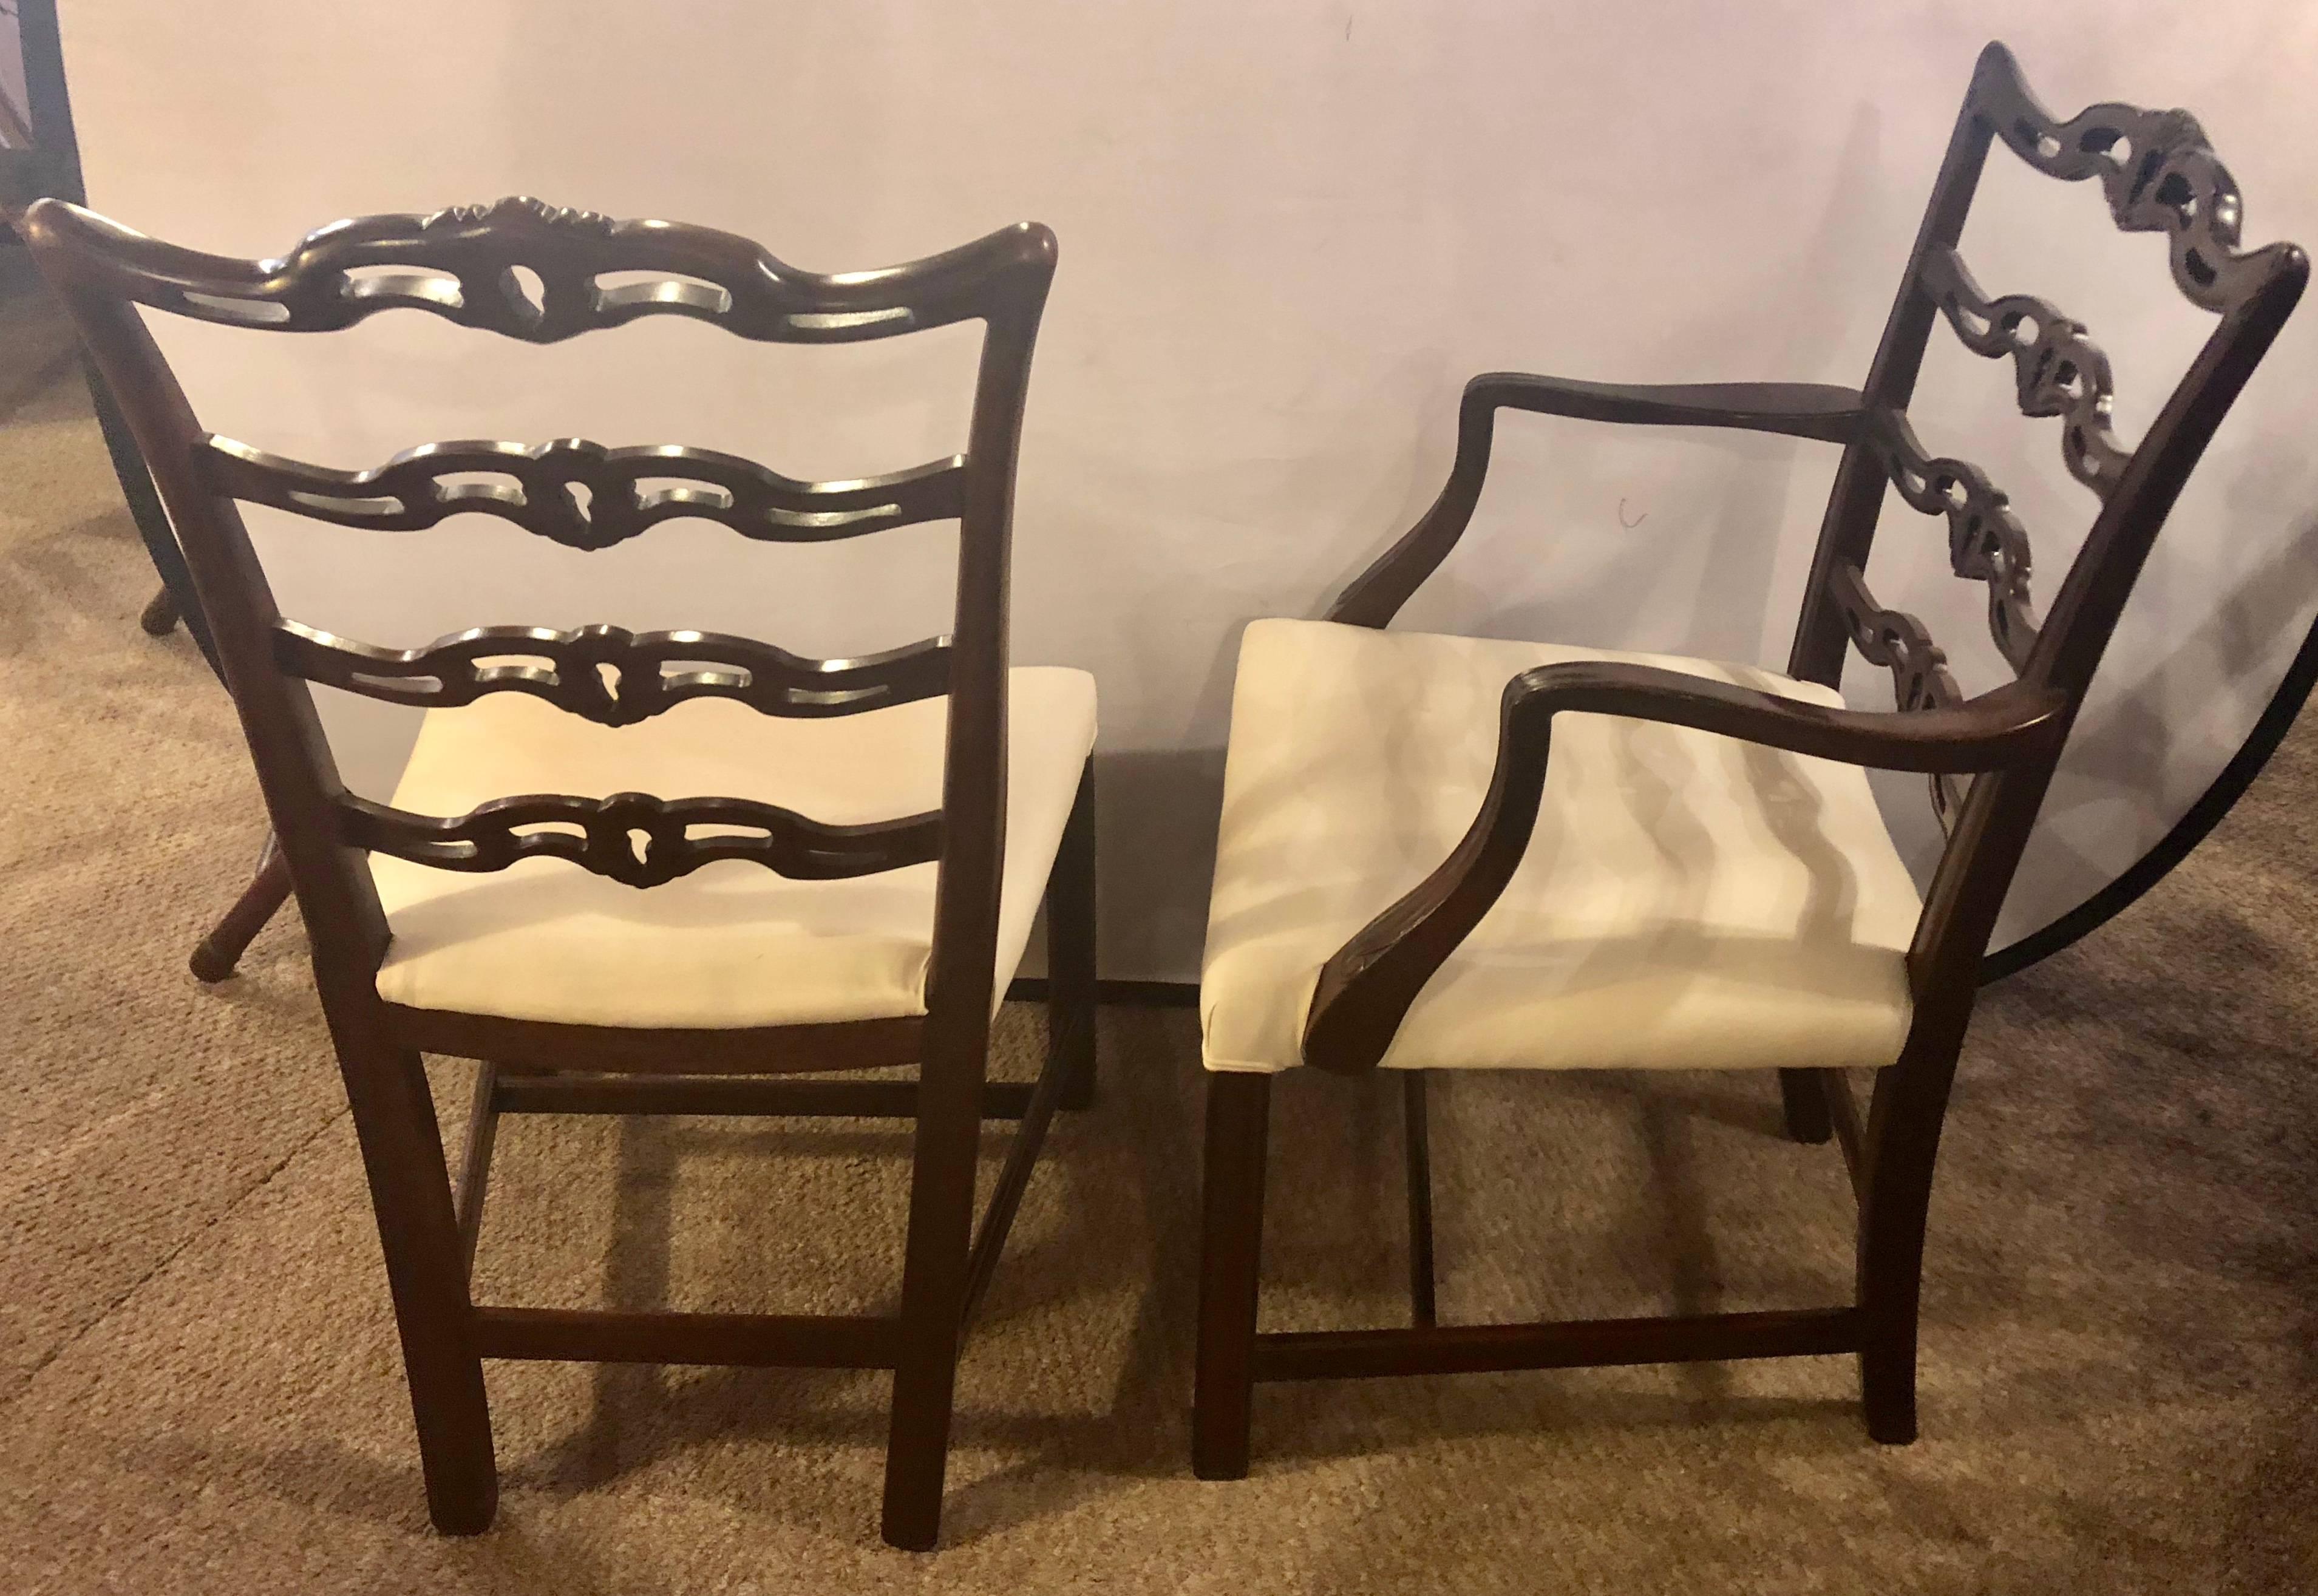 Set of ten ladder back Chippendale style dining chairs newly upholstered and polished. These fine early Chinese chippendale style dining chairs have ladder backs with shell carved motifs sitting on straight legs with undercarriage supports. Can